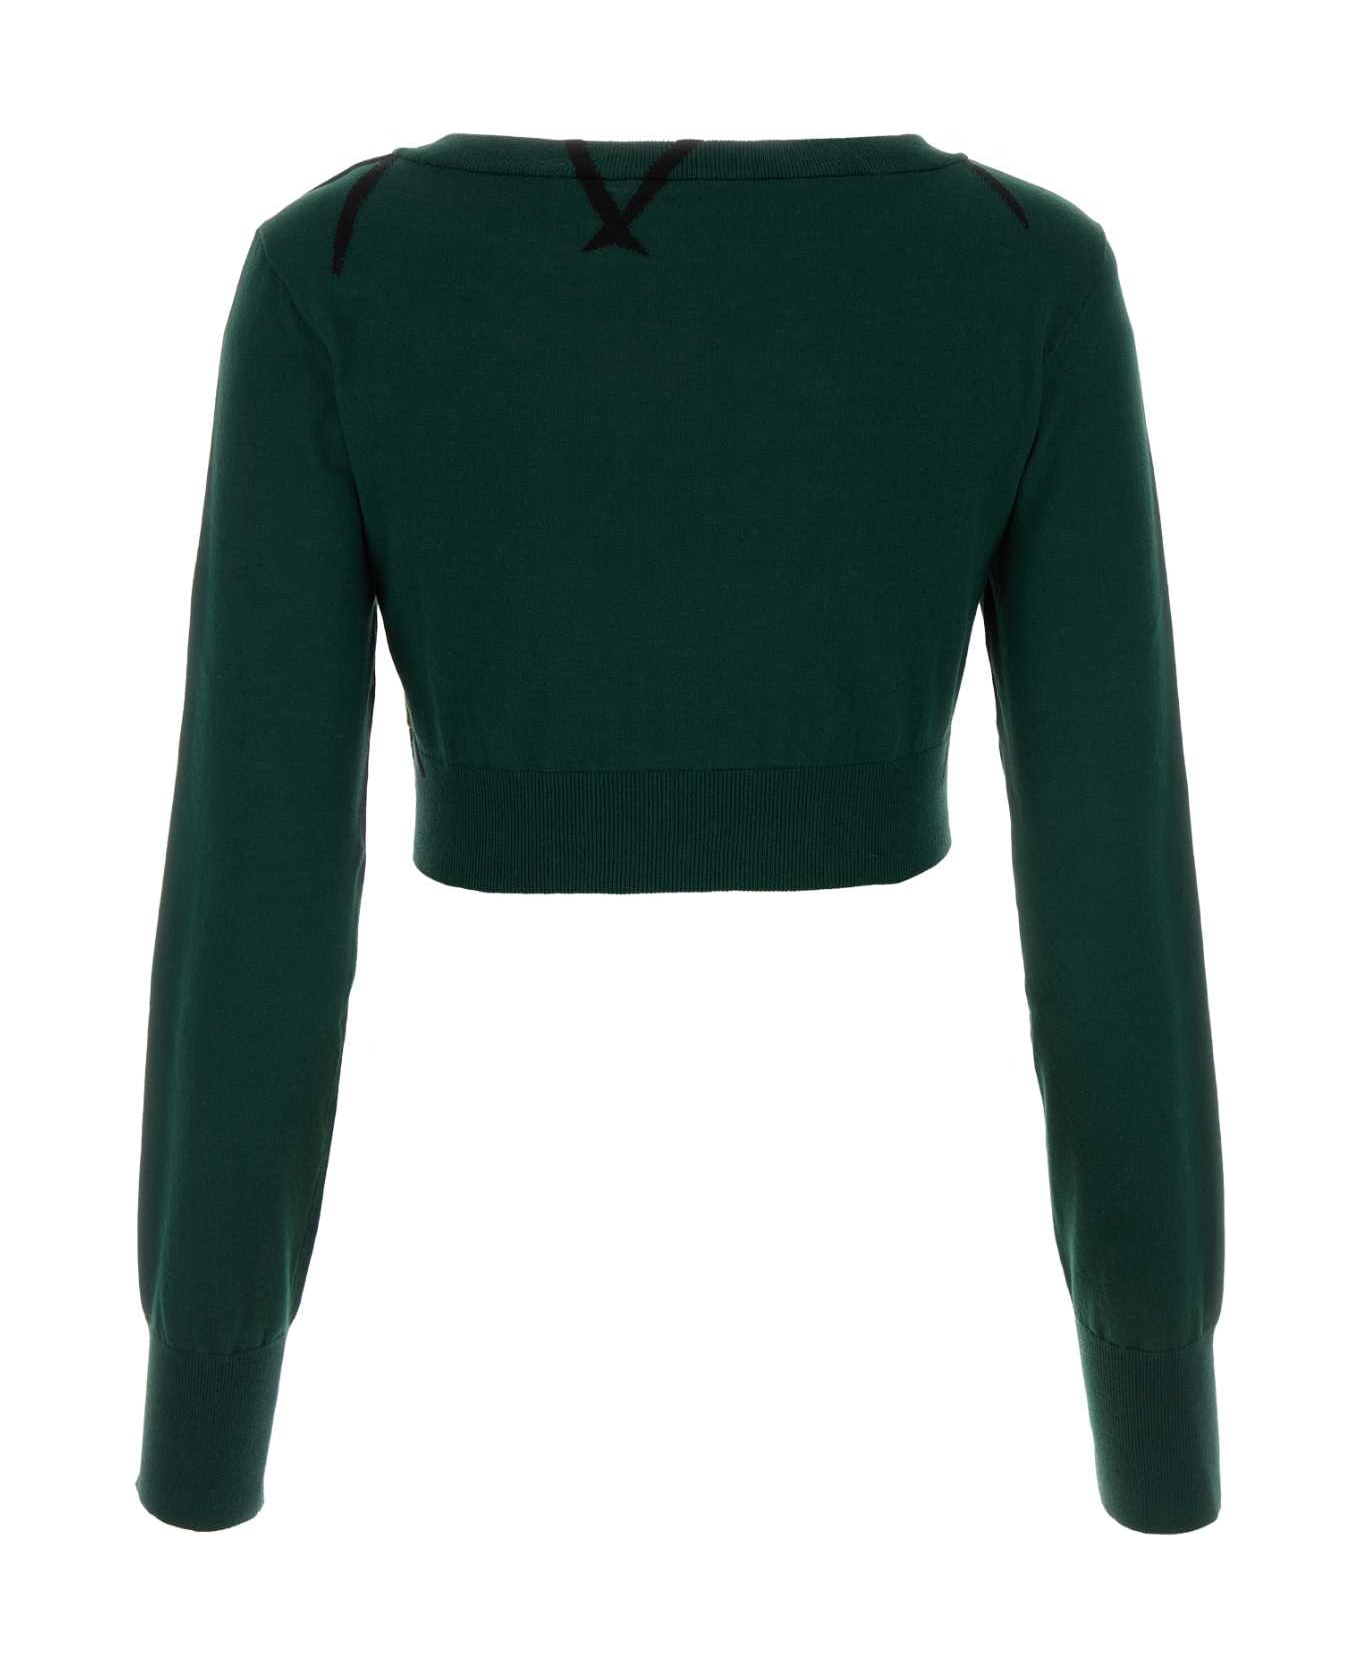 Burberry Bottle Green Cotton Sweater - IVY